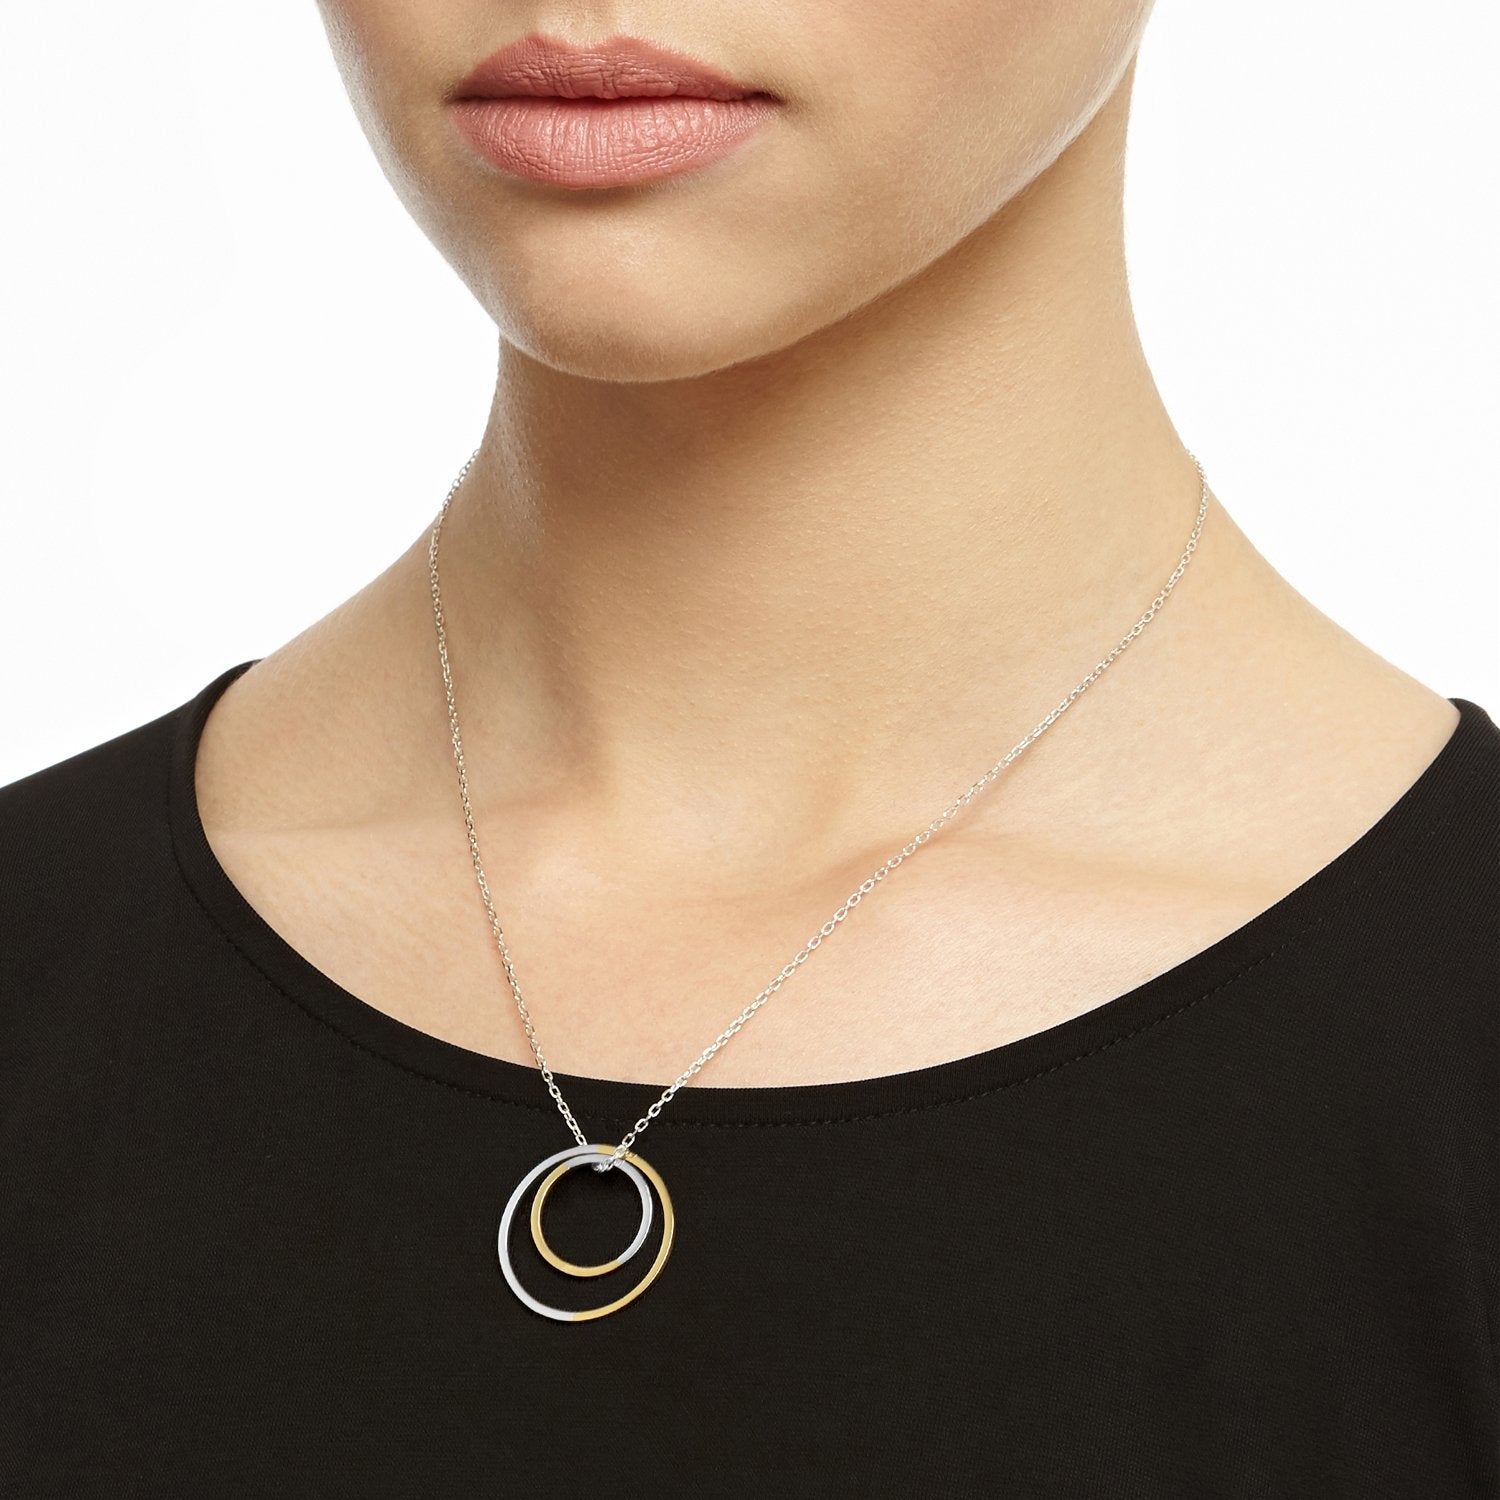 Two-tone Double Circle Necklace - 9k Yellow Gold & Silver - Myia Bonner Jewellery